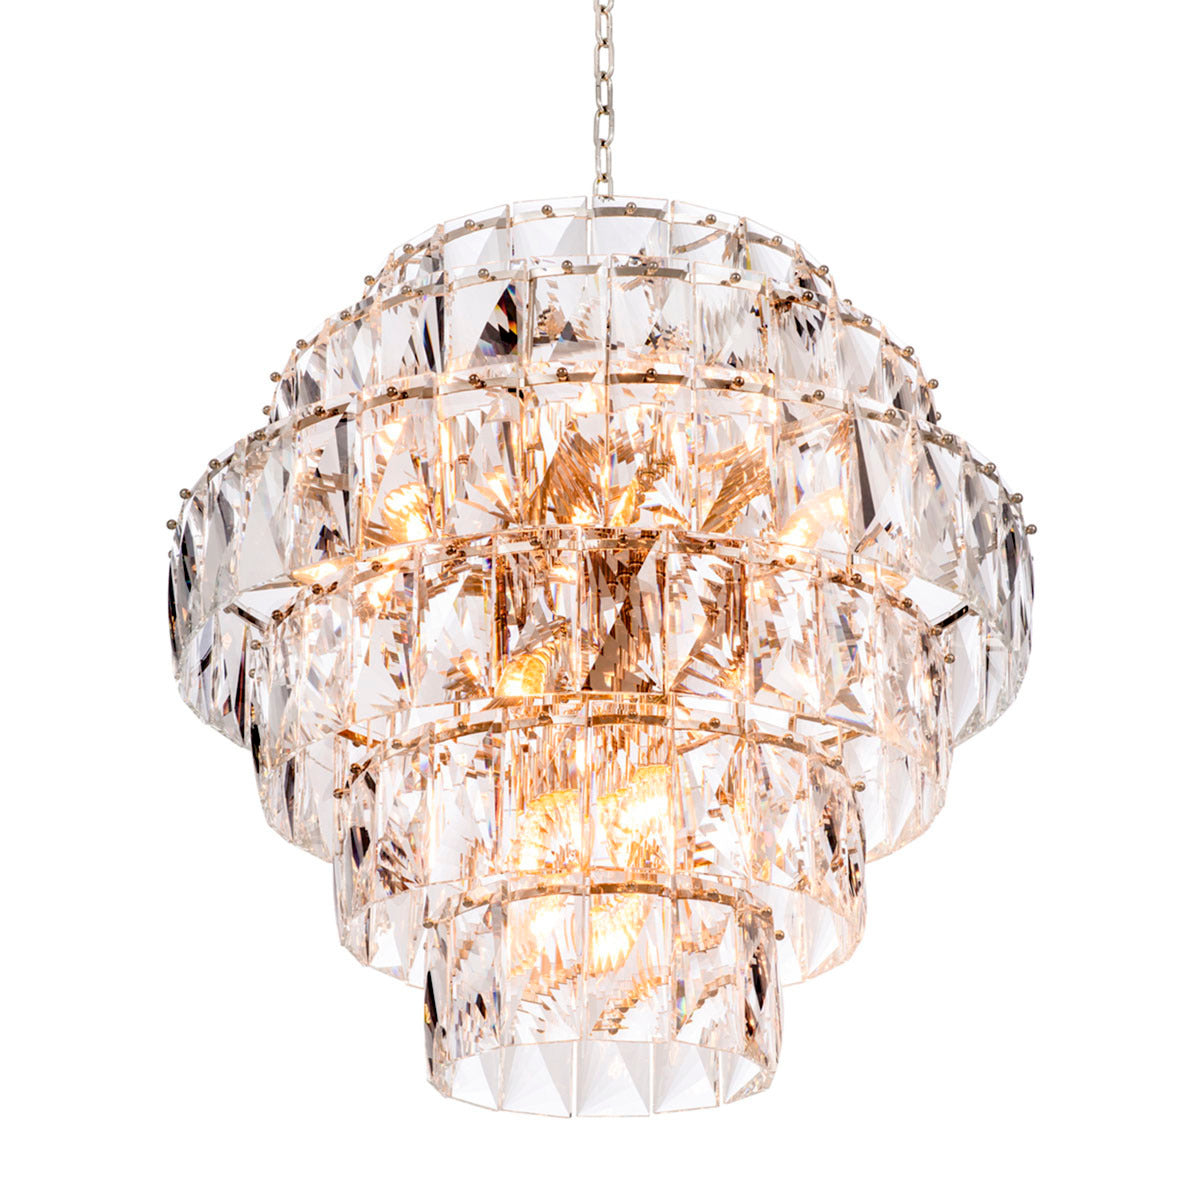 Image of Eichholtz Amazone Chandelier (Available in 2 Sizes)